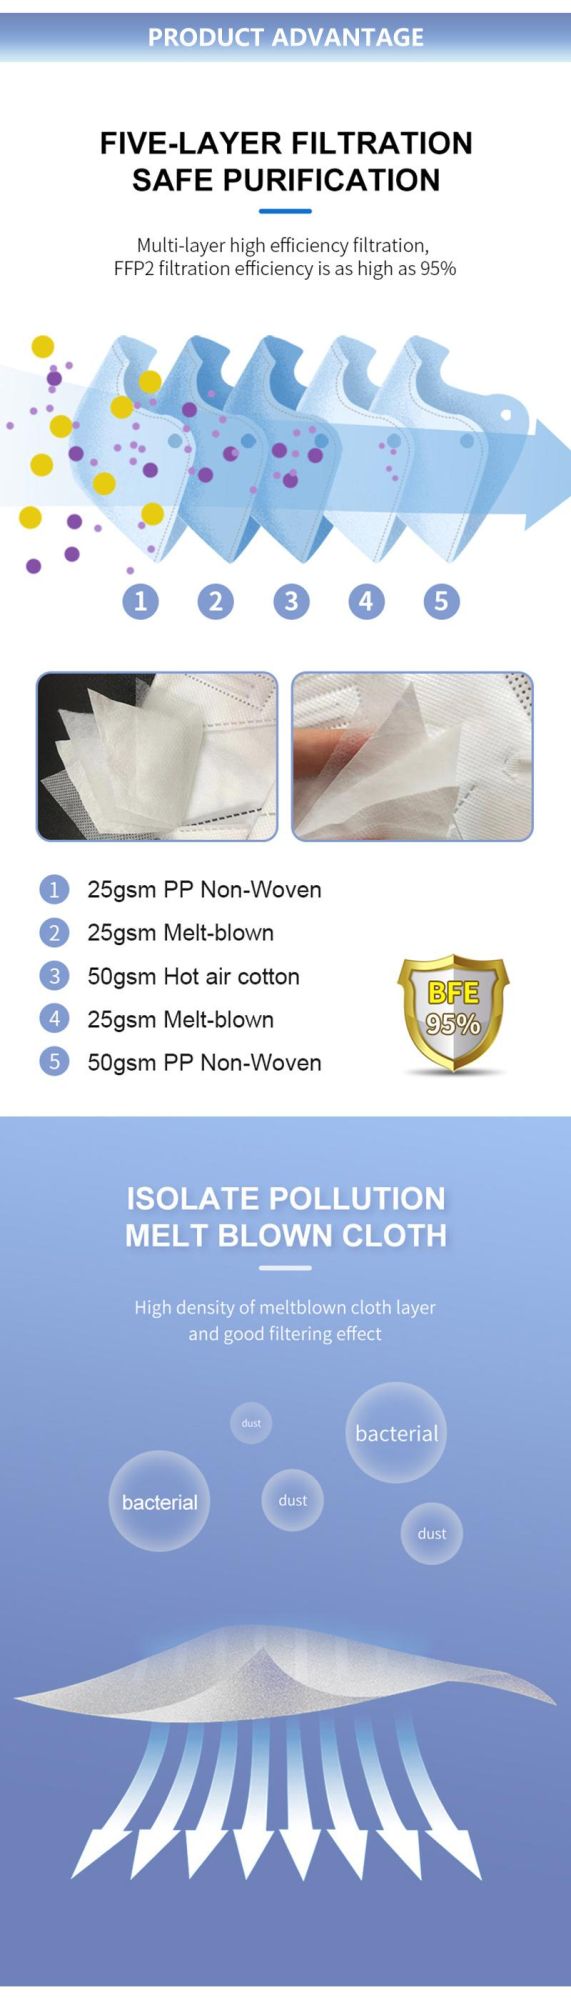 5-Layer PP Melt Blown Non-Woven Bfe 99/95, PPE KN95 Mask KN95 Cone Face Masks Respirator with Earloops Manufacturer KN95 Cone Mask KN95 Face Masks